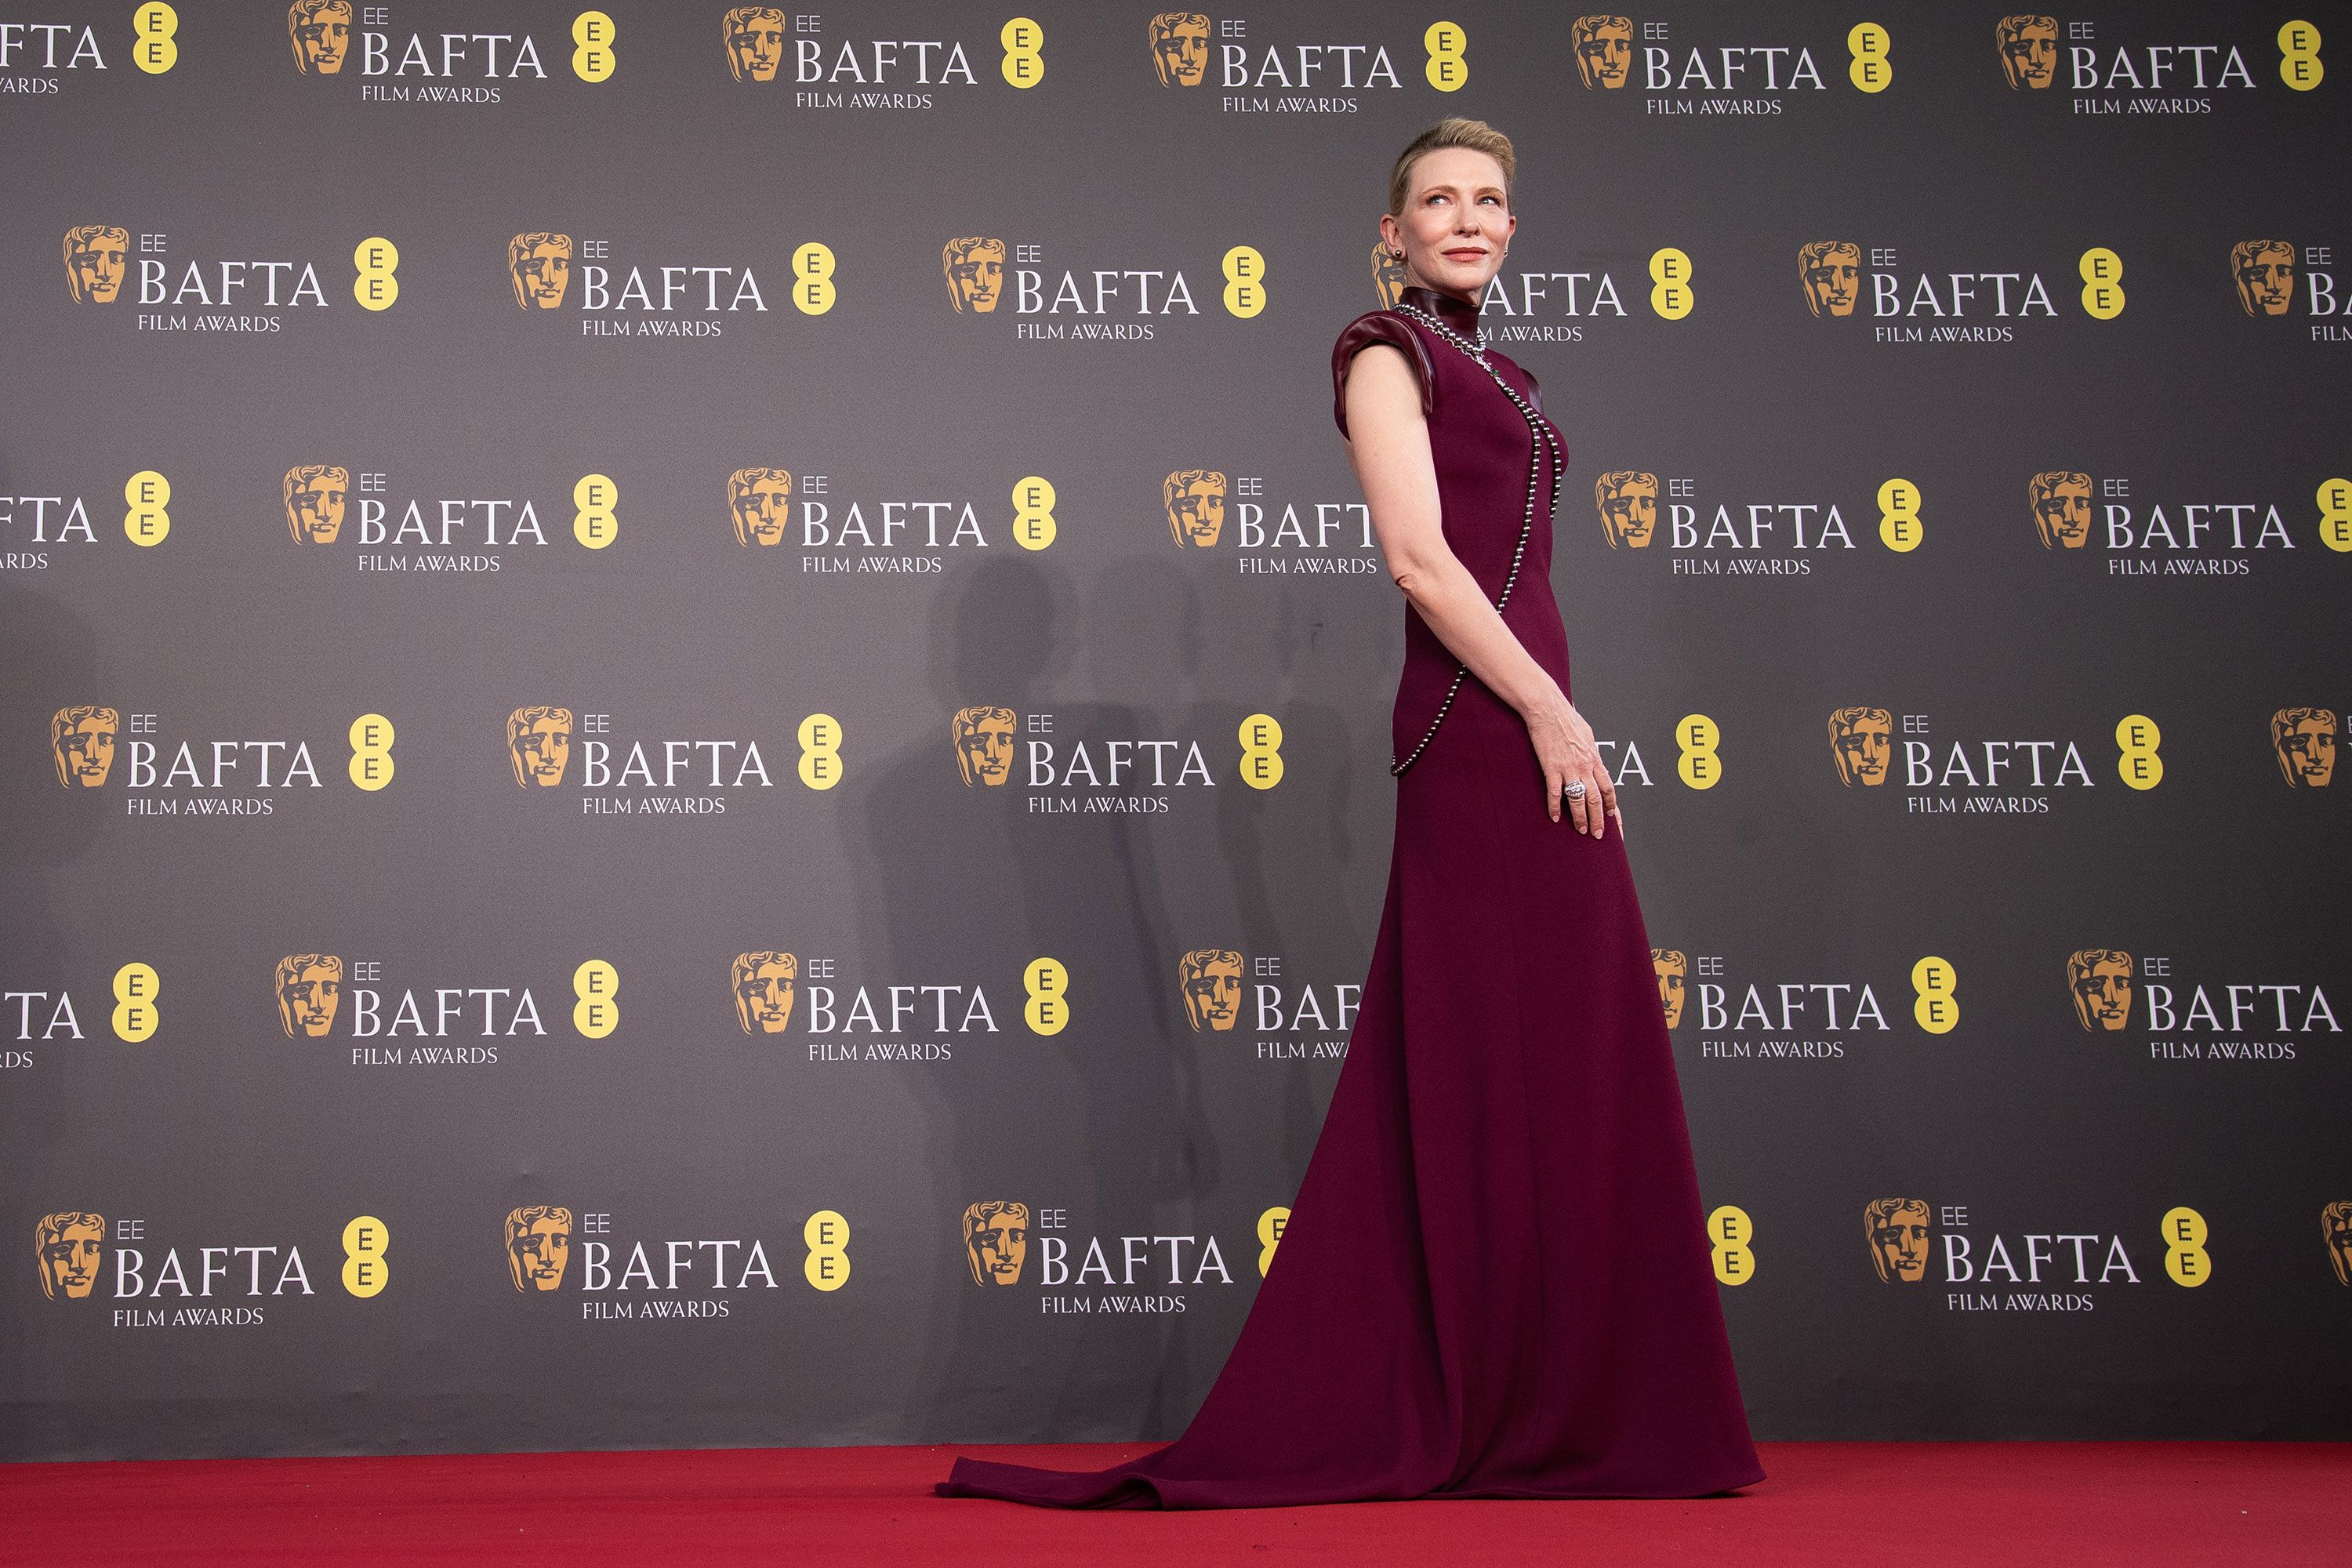 Cate Blanchett chose a Louis Vuitton gown made of deadstock fabric and a necklace repurposed from jewelry she wore to last year’s BAFTAs.